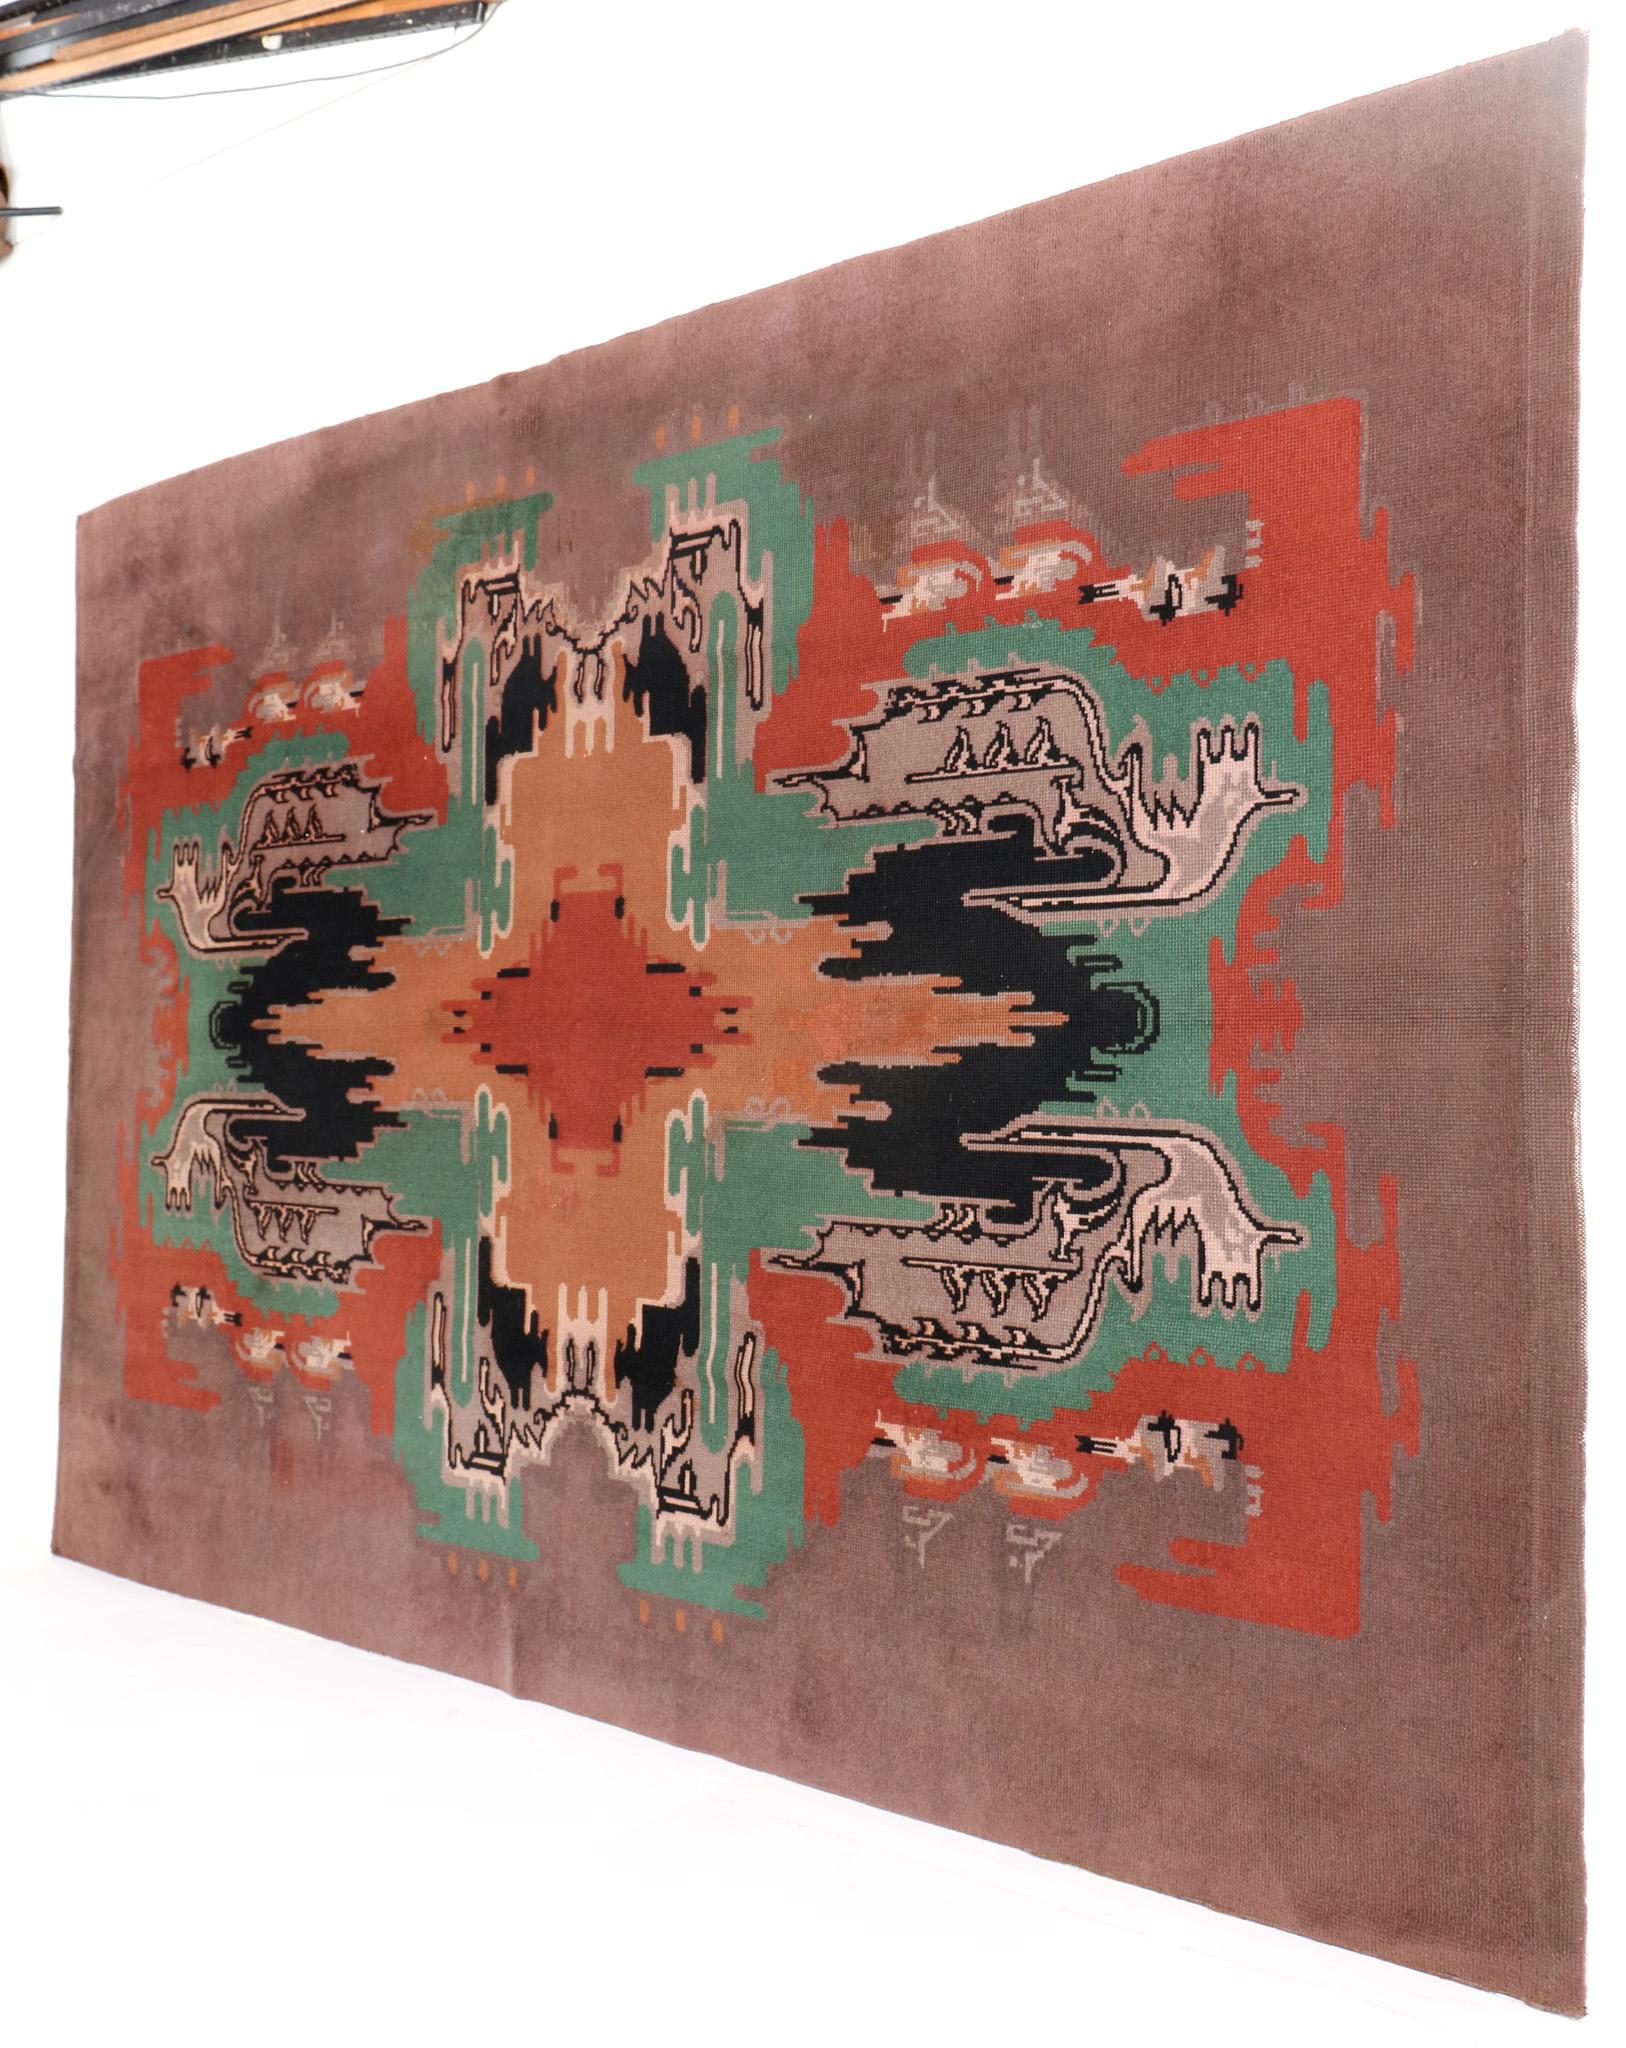 Magnificent and ultra rare Art Deco Amsterdamse School carpet or rug.
Design by Jaap Gidding for Koninklijke Vereenigde Tapijtfabrieken Rotterdam.
Model: Silma 5012.
Striking Dutch design from the 1920s.
multicolored wool with the famous